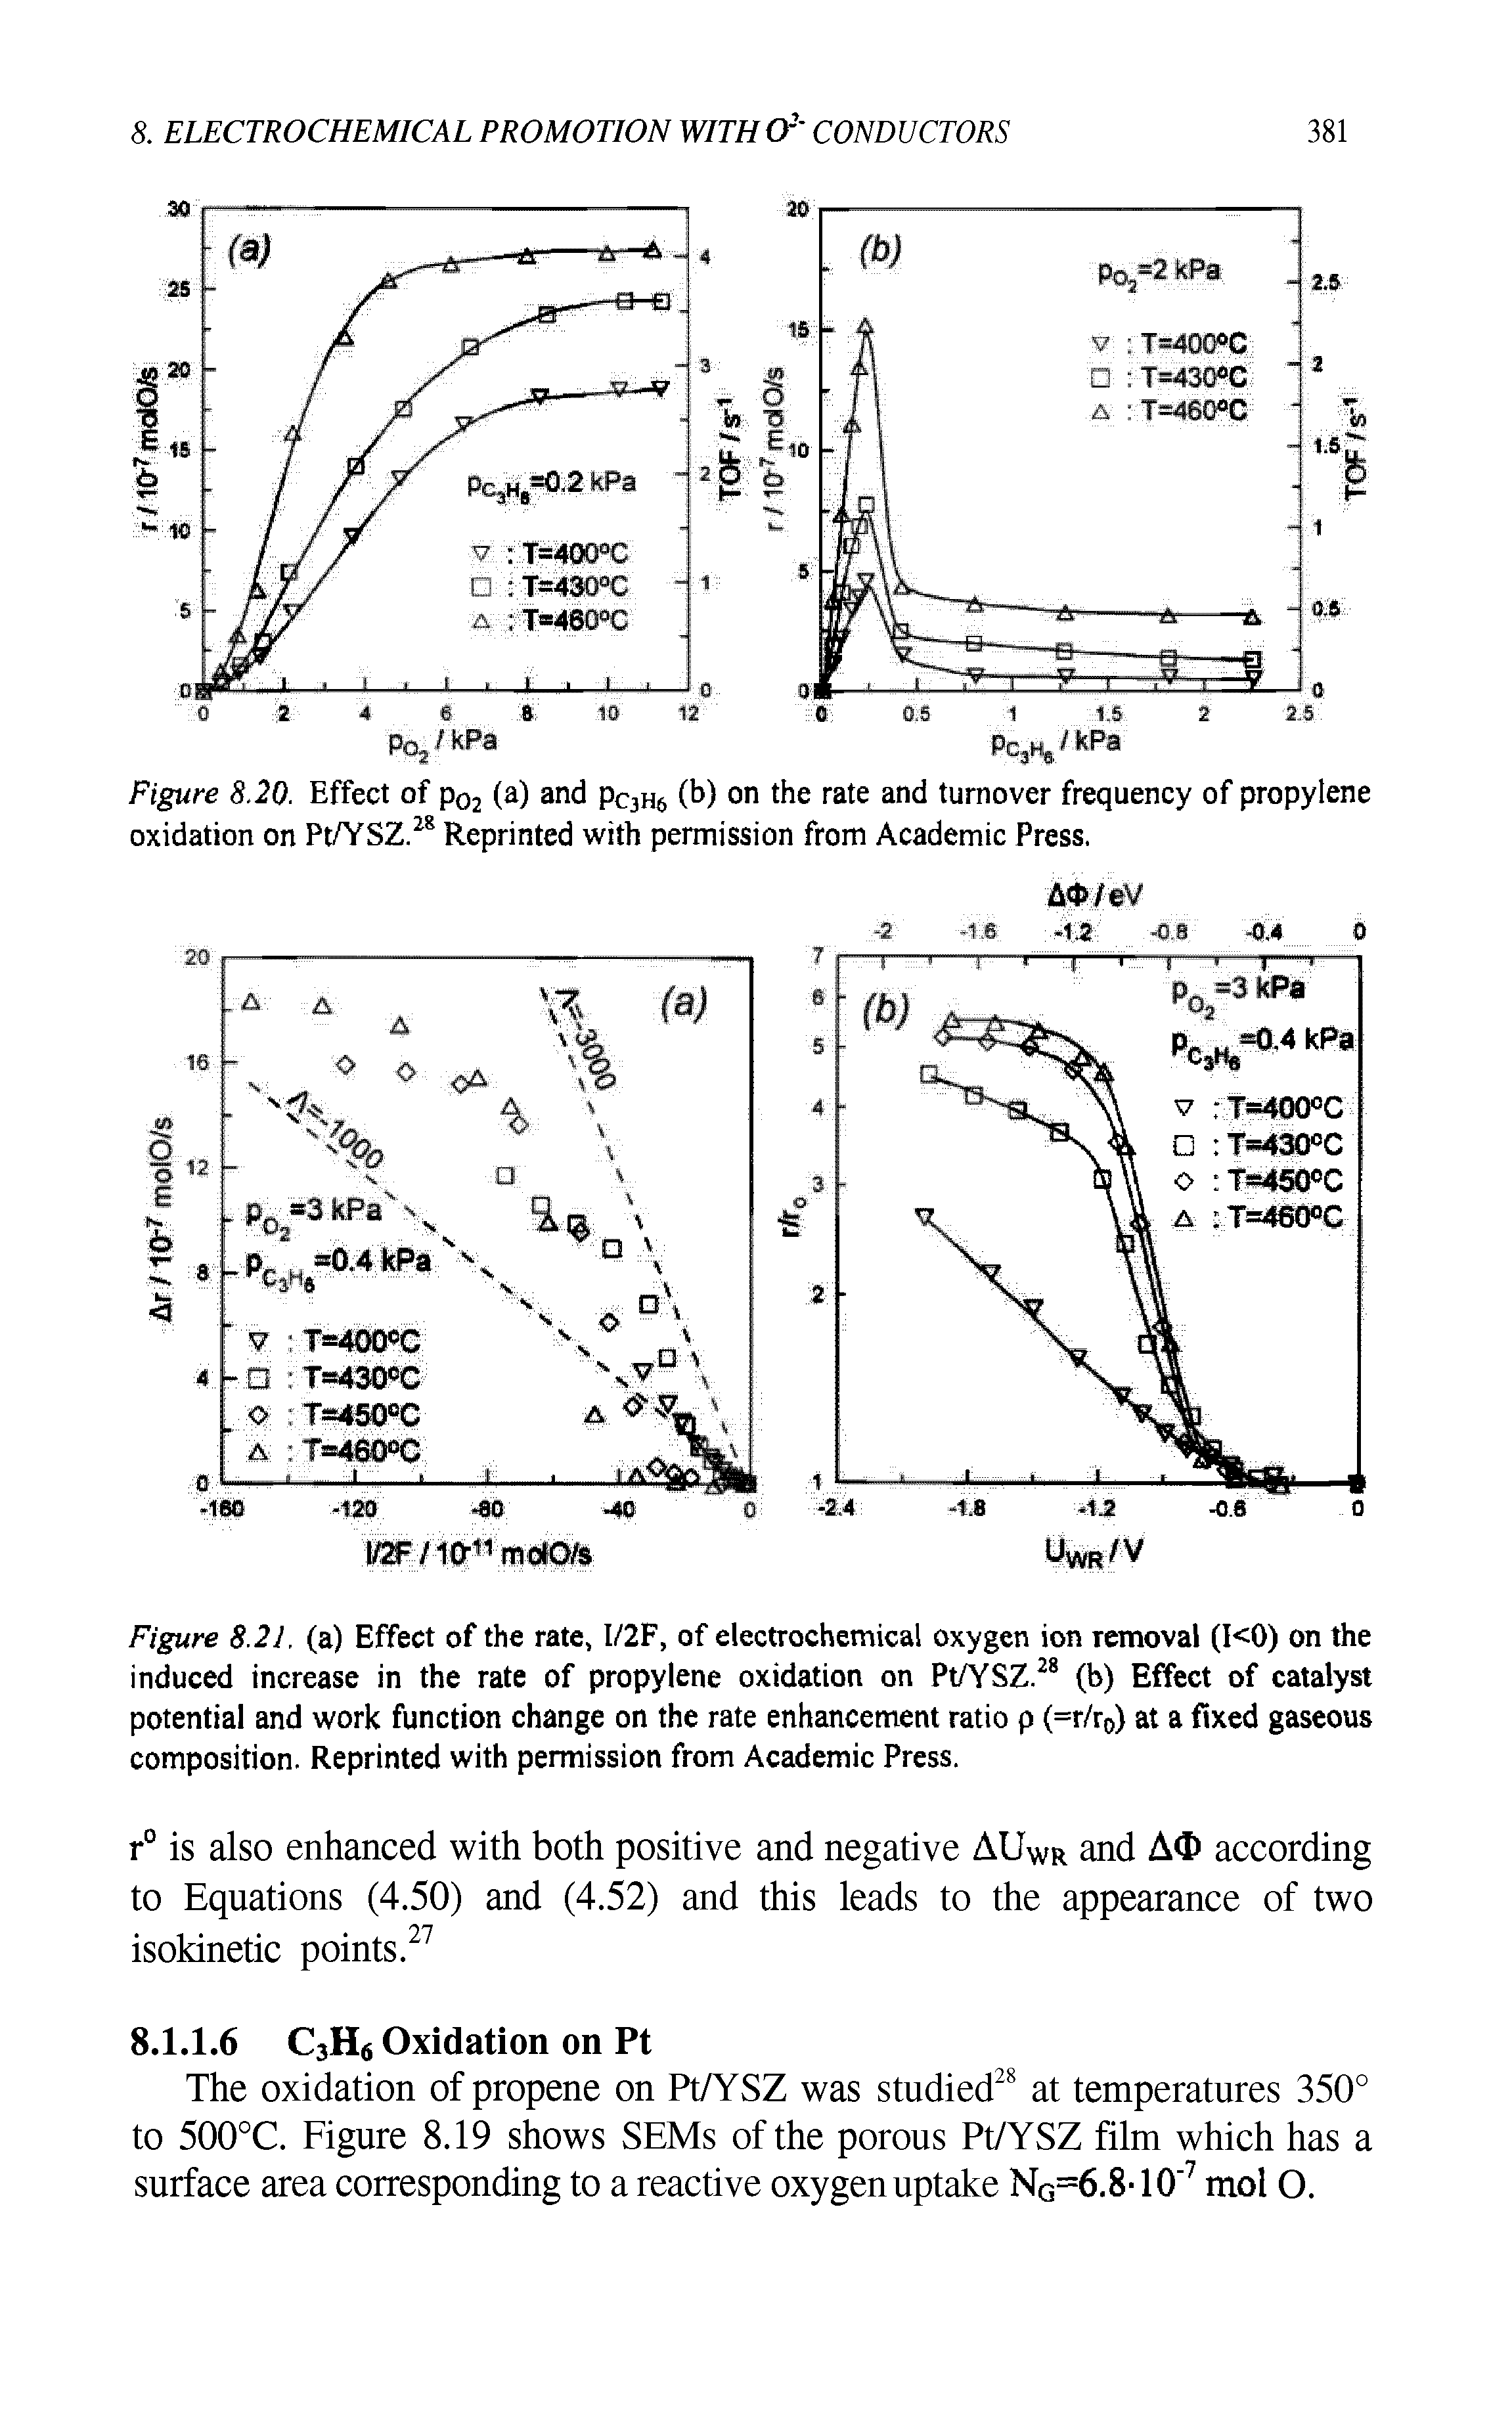 Figure 8.20. Effect of p02 (a) and pC3H6 (b) on the rate and turnover frequency of propylene oxidation on Pt/YSZ.28 Reprinted with permission from Academic Press.